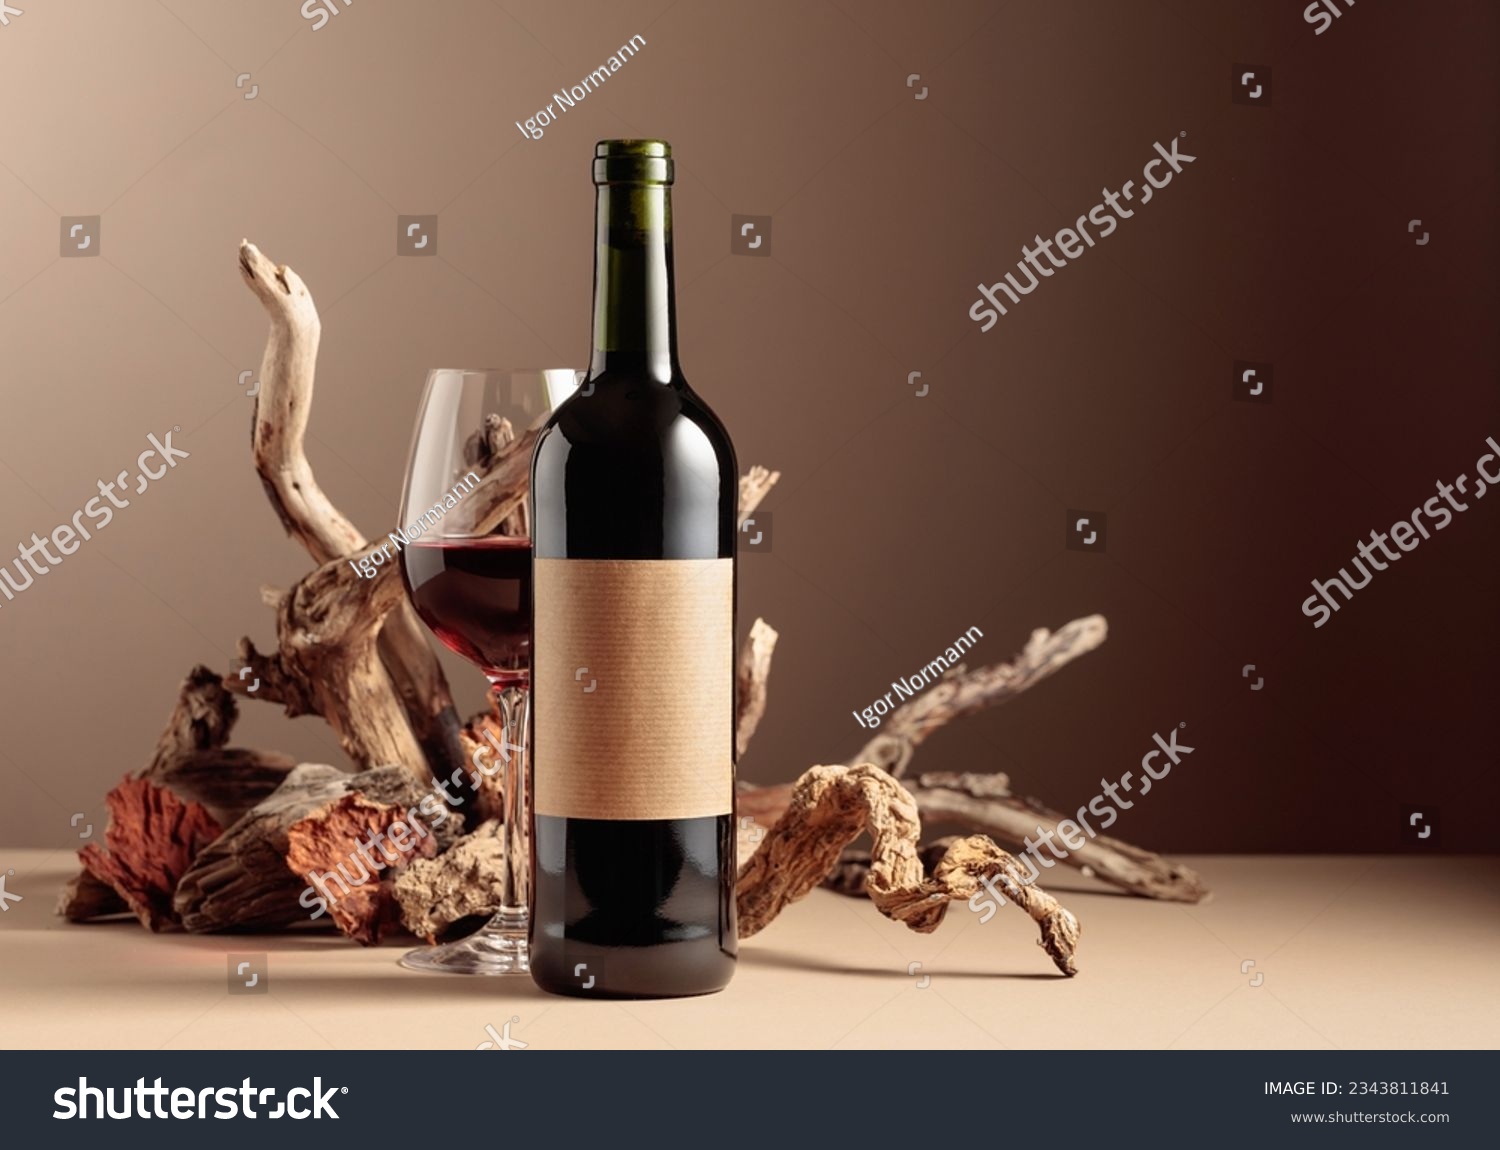 Bottle and glass of red wine with a composition of old wood. Minimalistic composition on a beige background for product branding, identity, and packaging. Copy space. #2343811841